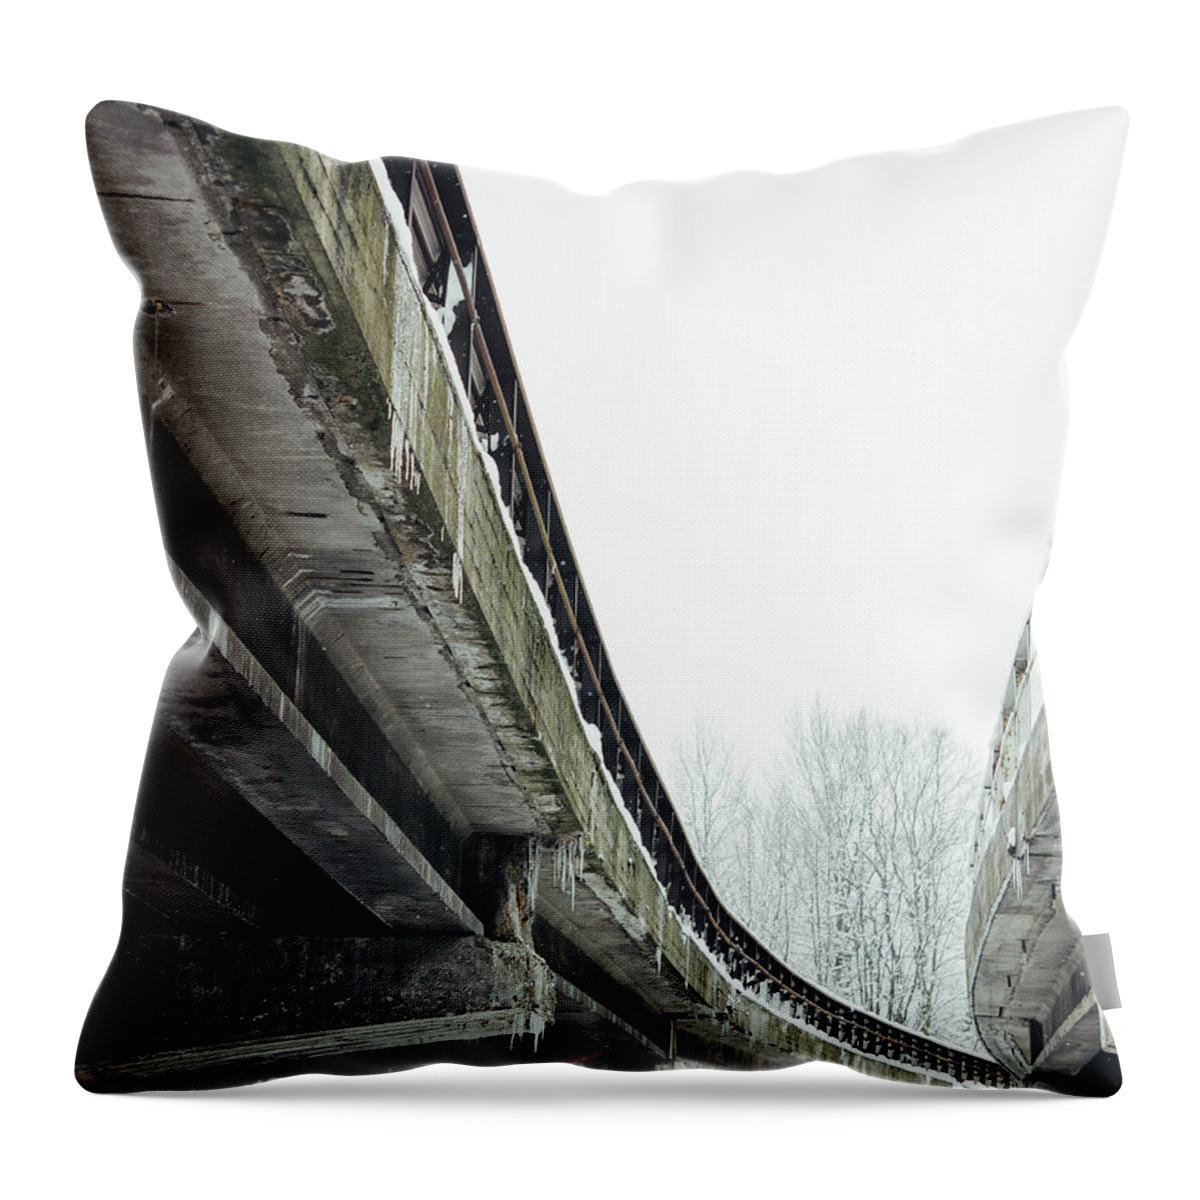 Concrete Throw Pillow featuring the photograph Concrete Jungle by Pati Photography